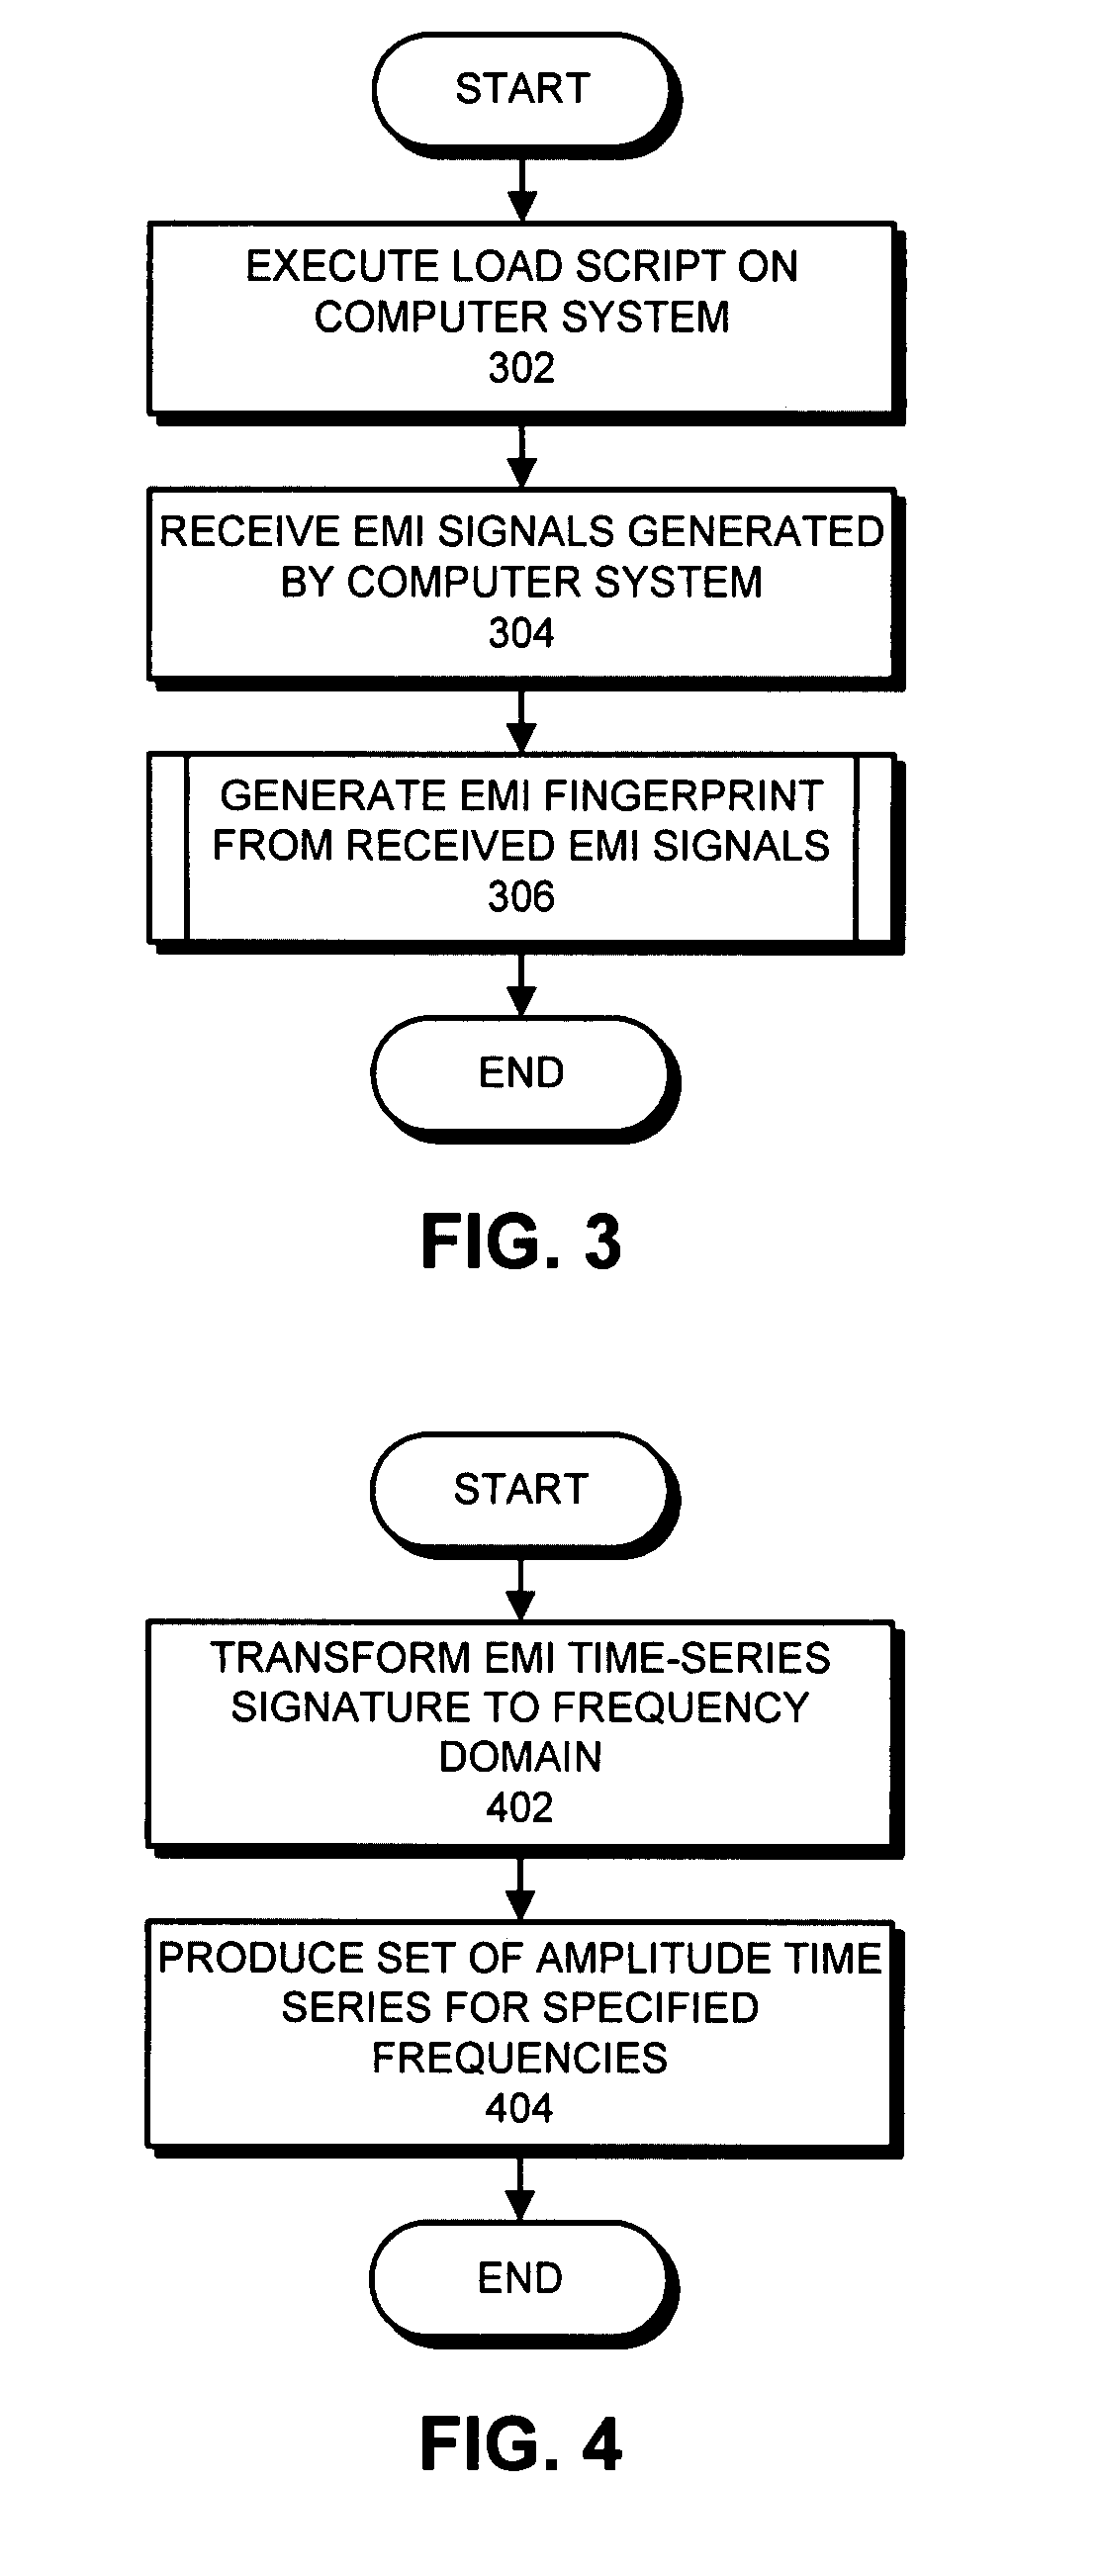 Method and apparatus for generating an EMI fingerprint for a computer system